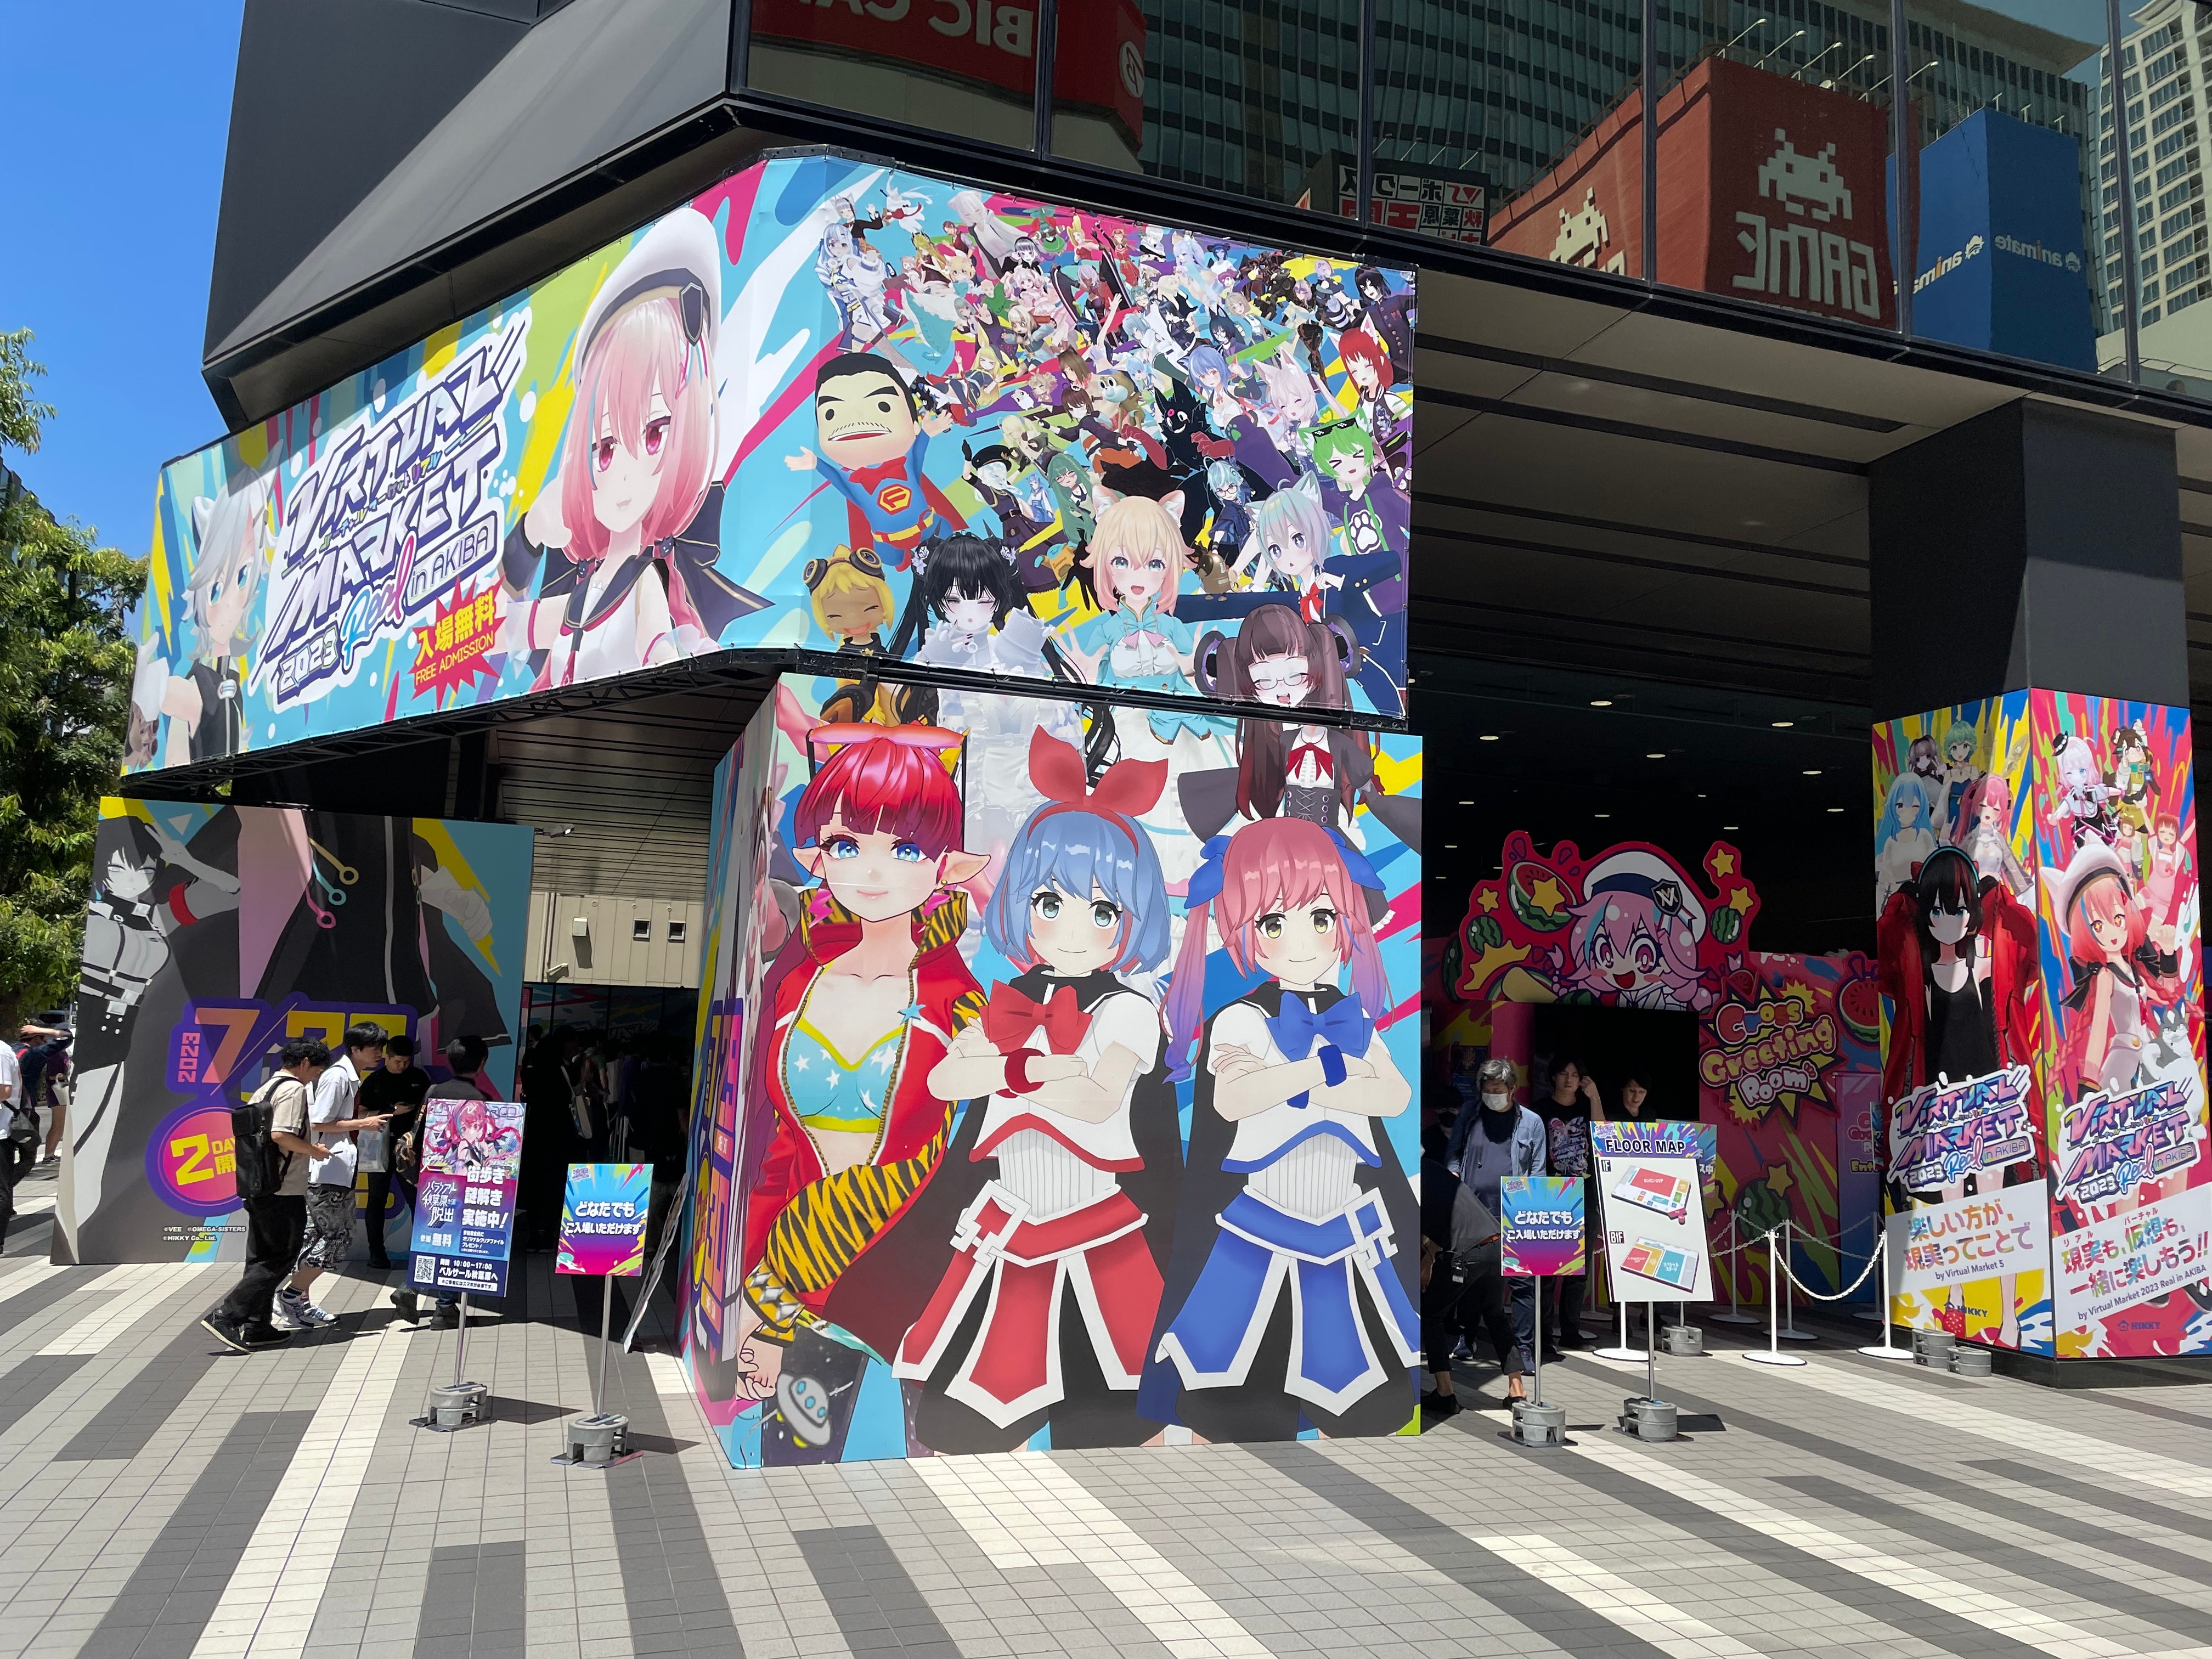 VR event with large posters with anime characters on